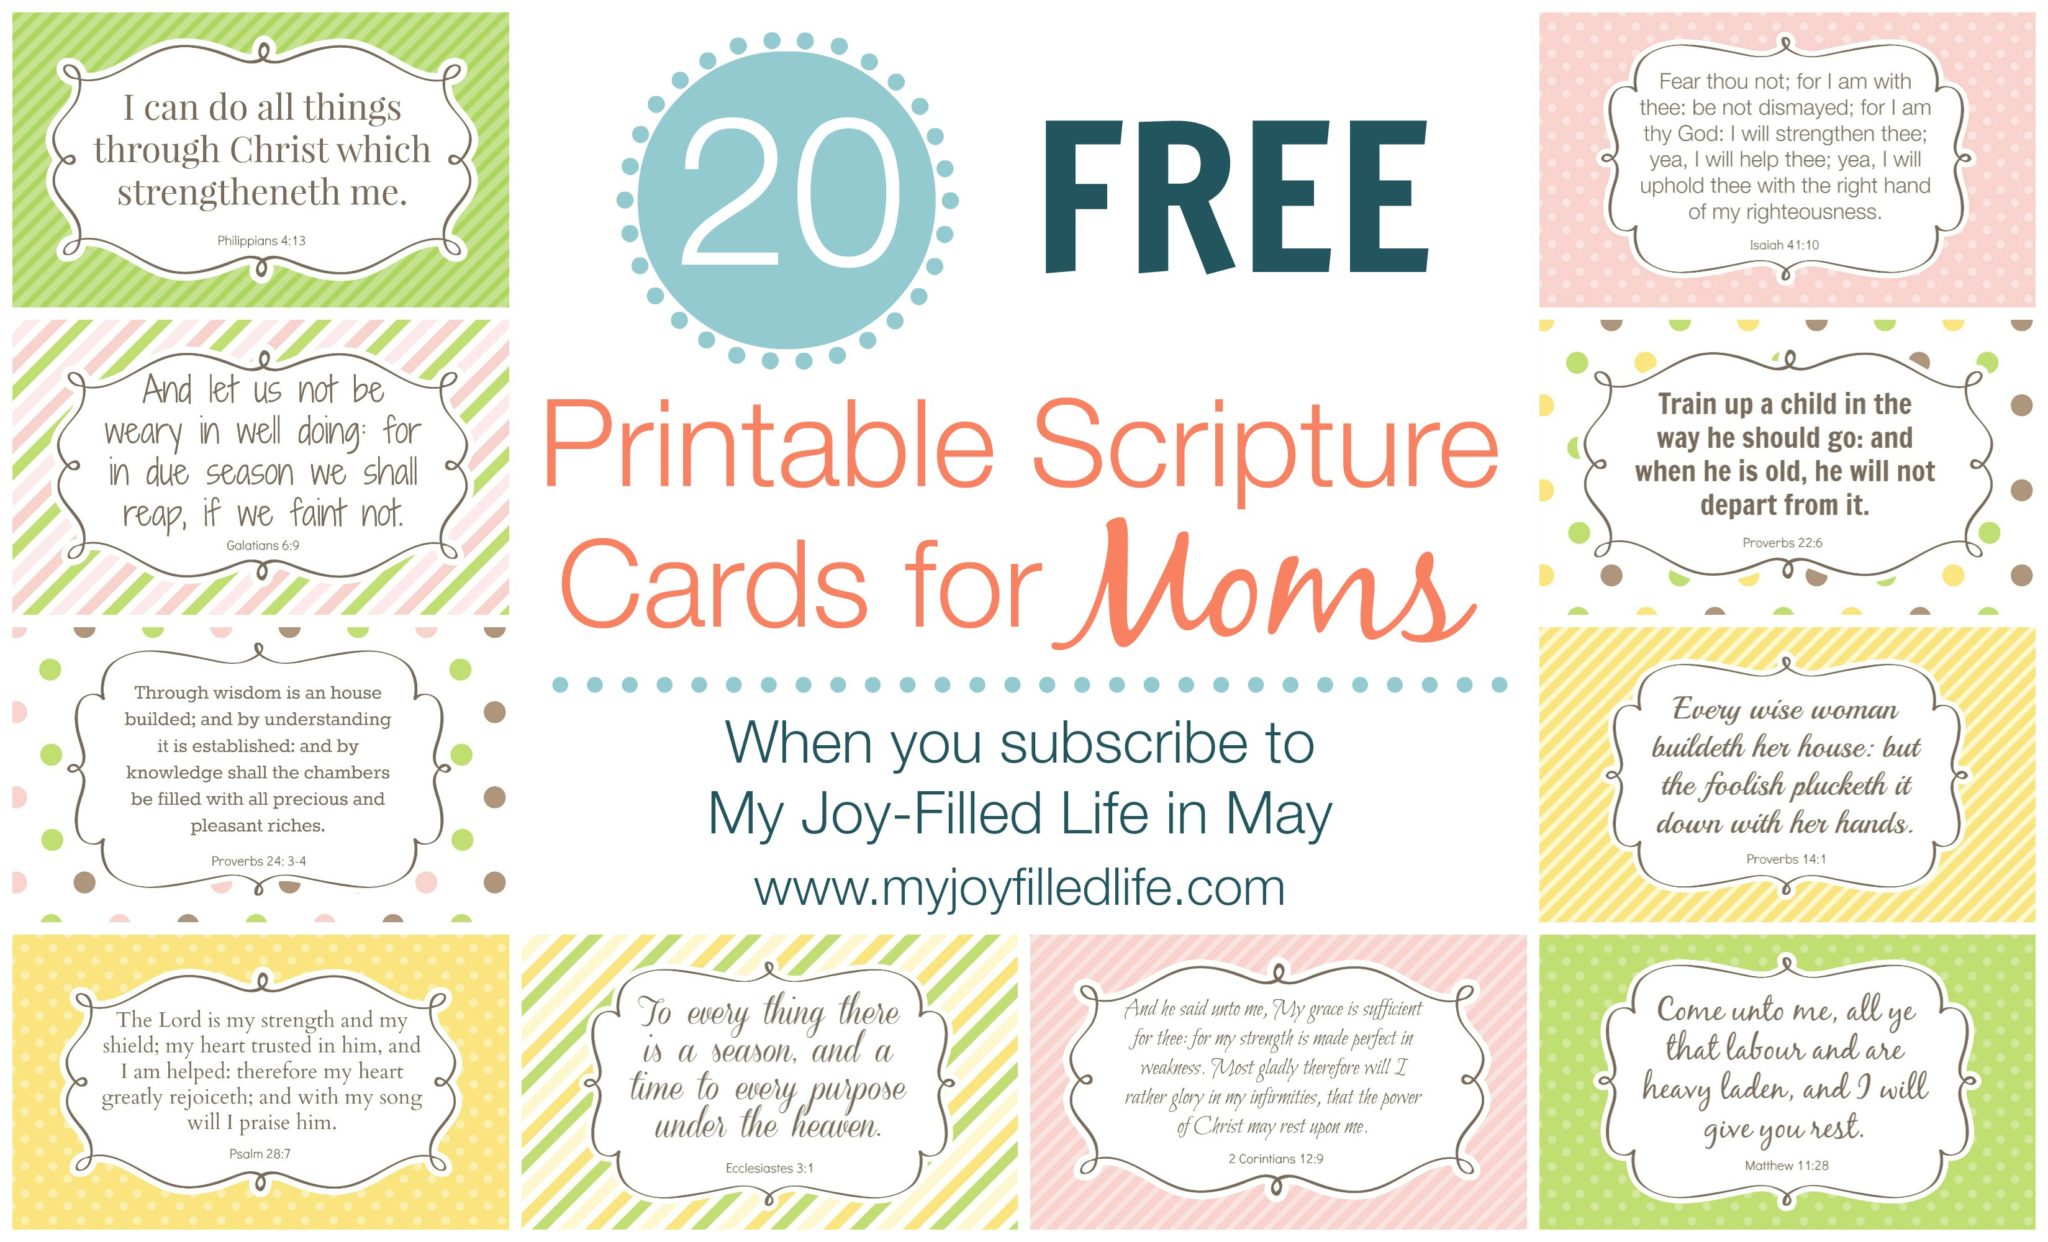 printable-scripture-cards-for-moms-free-for-subscribers-my-joy